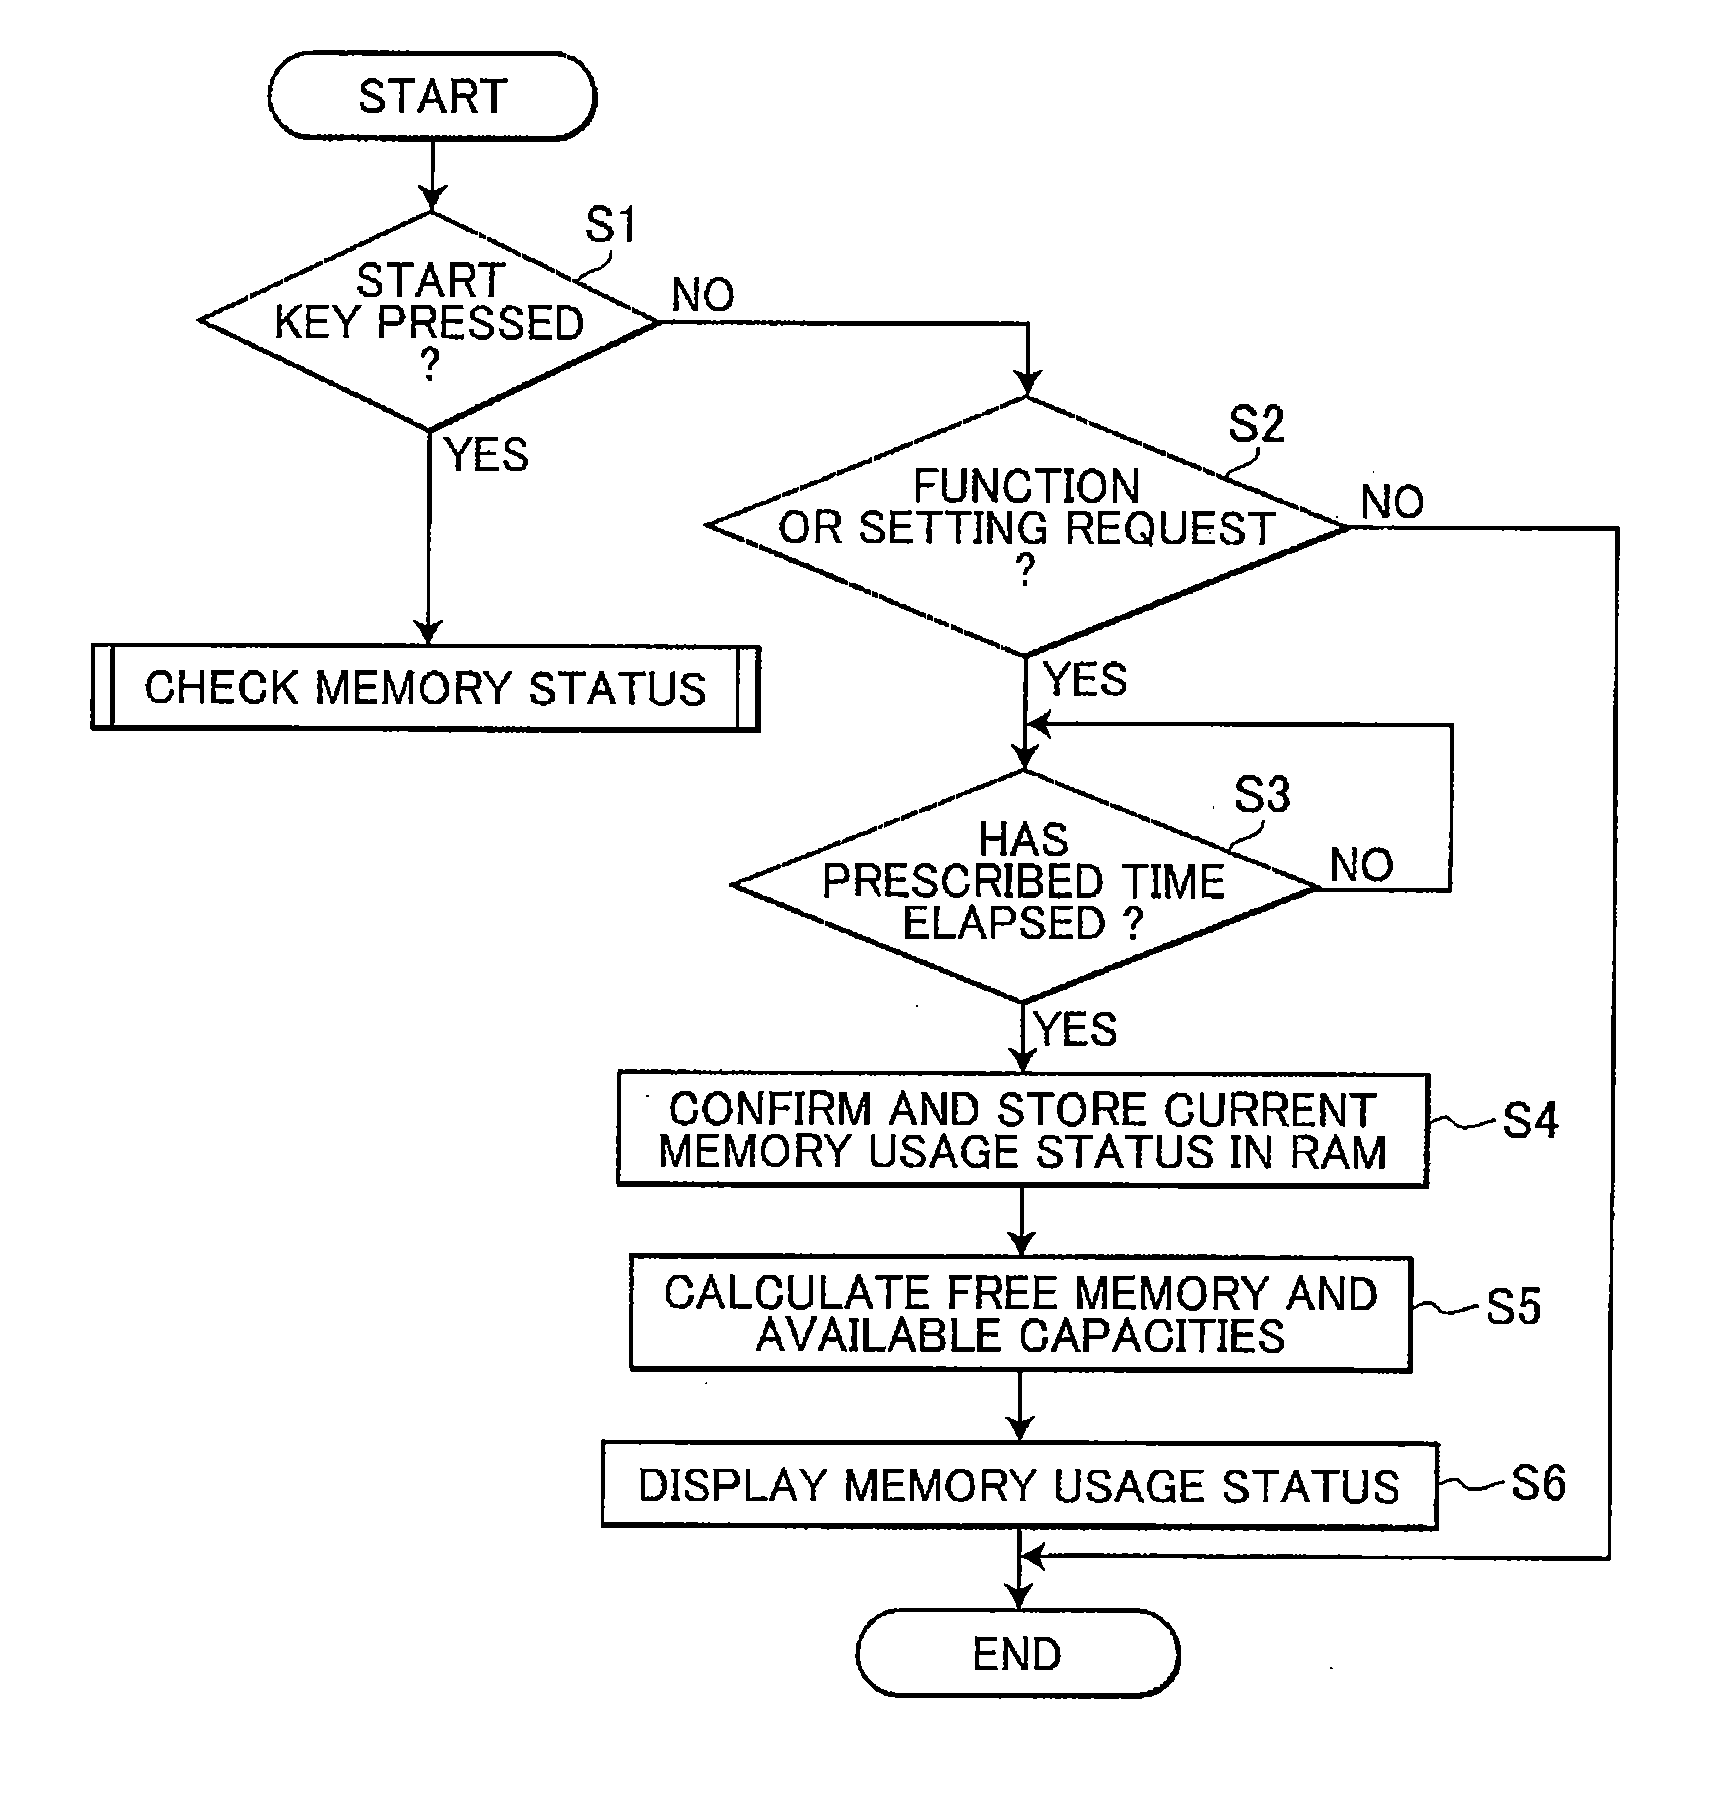 Image-Processing Device